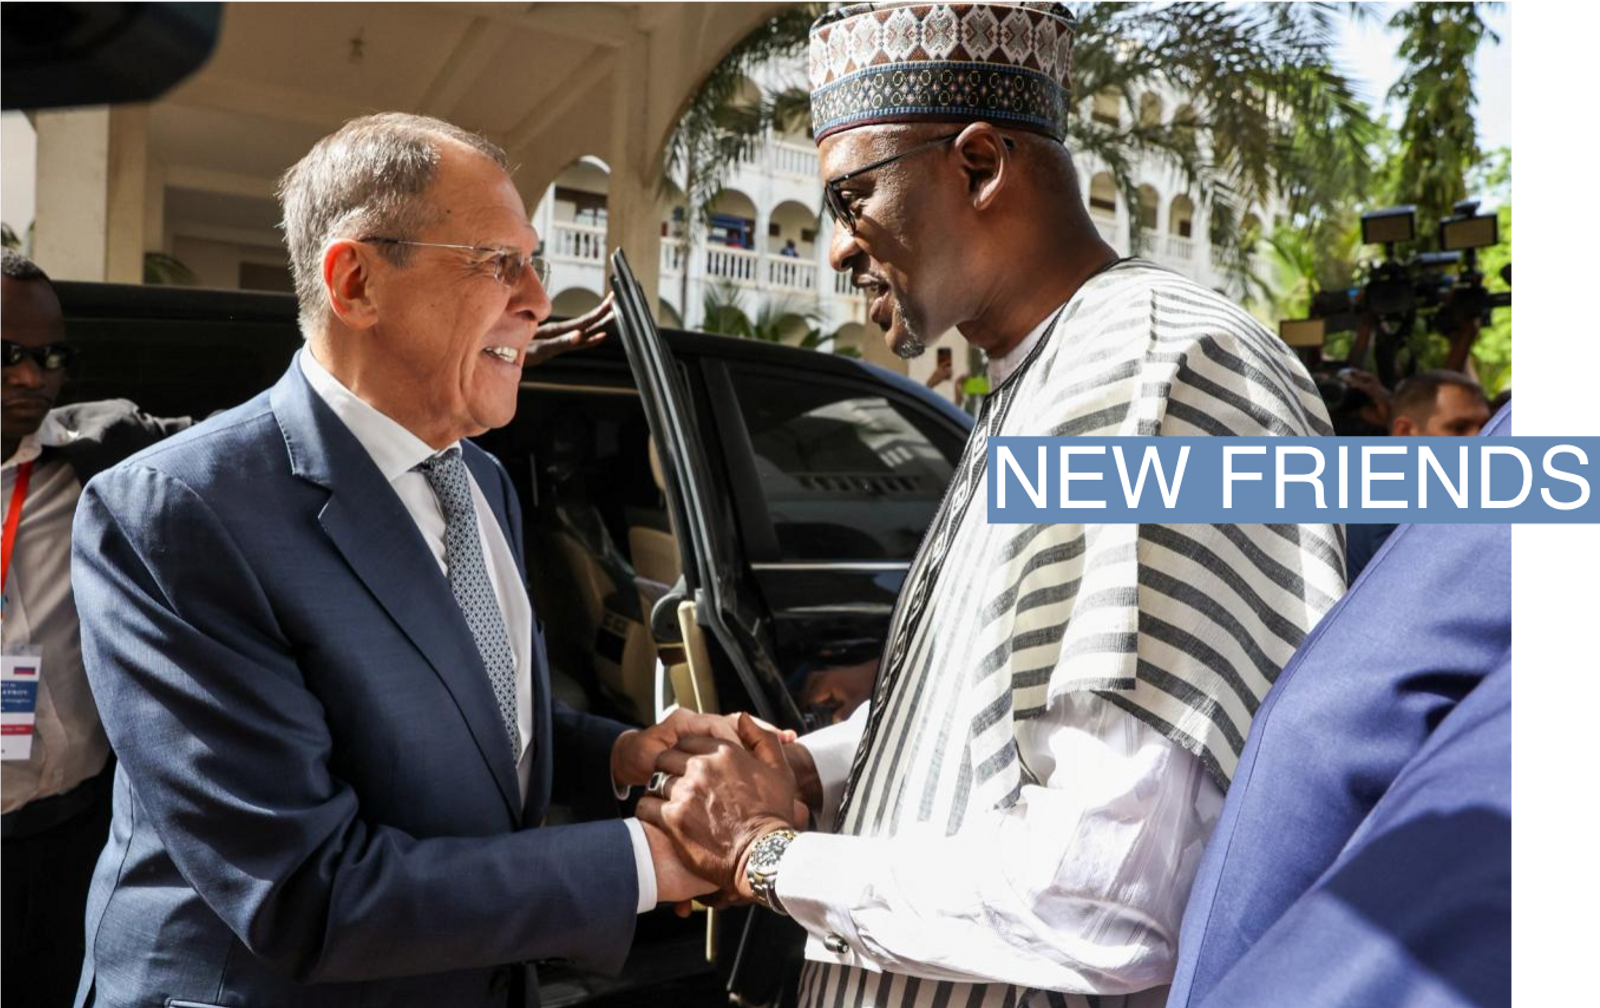 Russian Foreign Minister Sergei Lavrov is welcomed by his Malian counterpart Abdoulaye Diop before their talks in Bamako, Mali, February 7, 2023. 